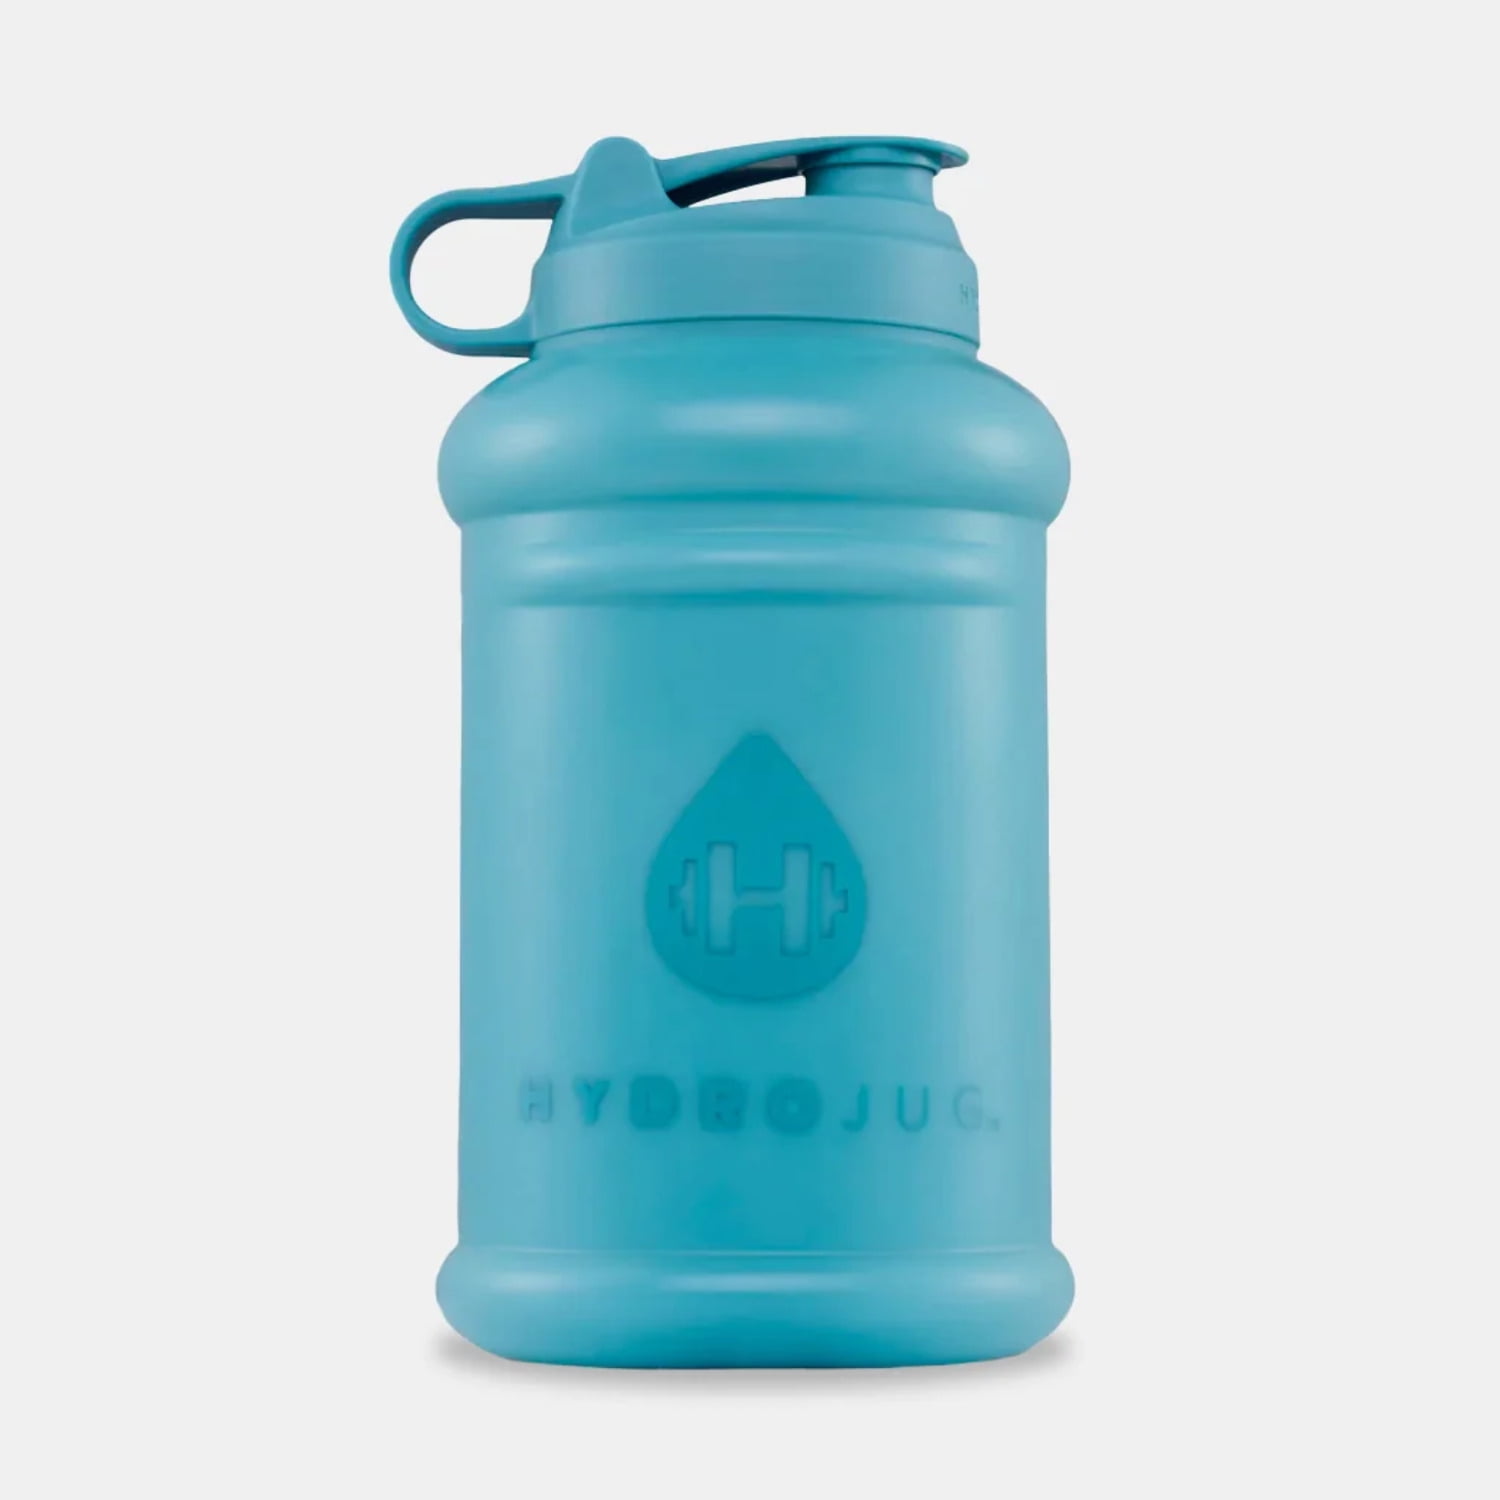 50% Off HydroJug discount Code, Huge 73oz Water Bottle AND Sleeve Only  $14.99 (Regularly $46)